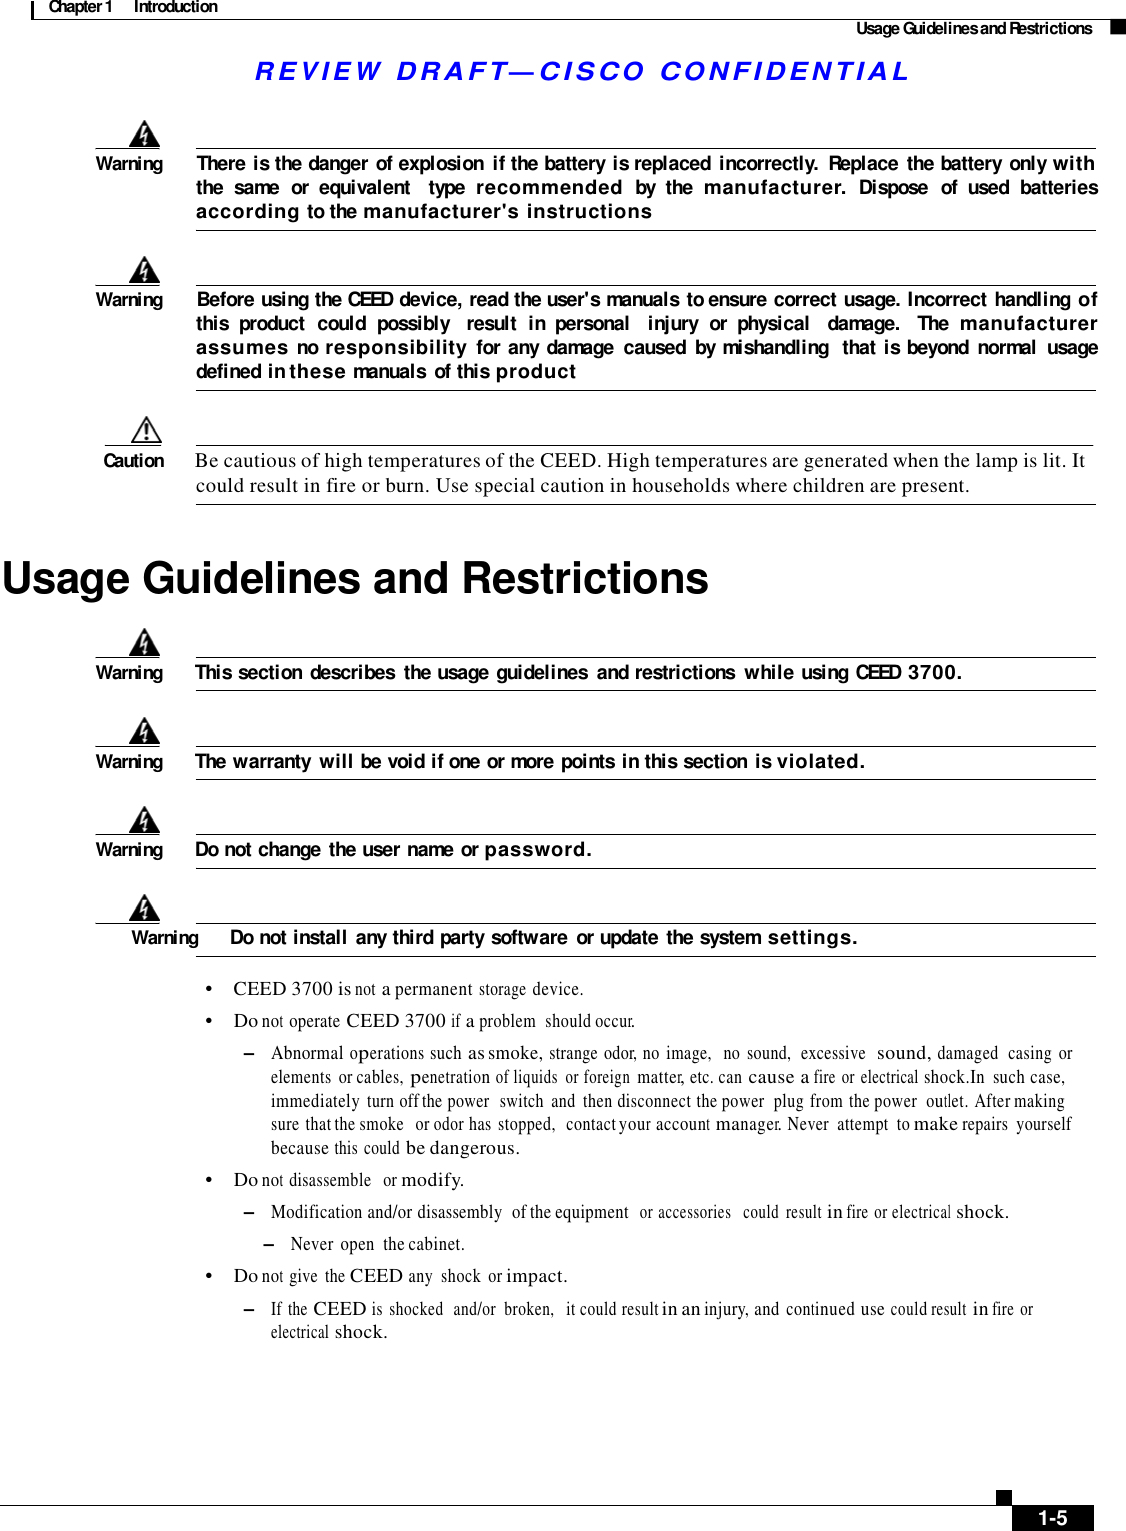 Chapter 1  Introduction Usage Guidelines and Restrictions R E V I E W  DR AFT — CISC O  C O NF IDE N TIAL      Warning        There is the danger  of explosion  if the battery  is replaced  incorrectly.  Replace  the battery  only with the  same  or  equivalent    type recommended by  the manufacturer. Dispose  of  used  batteries  according to the manufacturer&apos;s instructions    Warning        Before using the CEED device, read the user&apos;s manuals to ensure correct usage. Incorrect handling of this  product  could  possibly    result  in  personal   injury  or  physical  damage.   The manufacturer assumes no responsibility for  any  damage  caused  by mishandling   that  is beyond  normal  usage defined in these manuals  of this product    Caution  Be cautious of high temperatures of the CEED. High temperatures are generated when the lamp is lit. It could result in fire or burn. Use special caution in households where children are present.    Usage Guidelines and Restrictions    Warning  This section  describes  the usage guidelines  and restrictions  while using CEED 3700.    Warning  The warranty  will be void if one or more points  in this section  is violated.    Warning  Do not change  the user name or password.    Warning  Do not install any third party software  or update  the system settings.  •    CEED 3700 is not a permanent storage device. •    Do not operate CEED 3700 if a problem  should occur. –   Abnormal operations such as smoke, strange  odor, no  image,   no  sound,  excessive  sound, damaged  casing  or elements  or cables, penetration of liquids  or foreign matter, etc. can cause a fire  or  electrical shock.In  such case, immediately turn off the power   switch  and  then disconnect the power  plug from the power  outlet. After making  sure that the smoke   or odor has  stopped,  contact your account manager. Never  attempt  to make repairs  yourself because this  could be dangerous. •    Do not disassemble   or modify. –   Modification and/or disassembly  of the equipment  or accessories   could  result in fire  or electrical shock. –   Never  open  the cabinet. •    Do not give  the CEED any  shock  or impact. –   If  the CEED is  shocked   and/or  broken,   it could result in an injury, and continued use could result in fire  or electrical shock.            1-5 